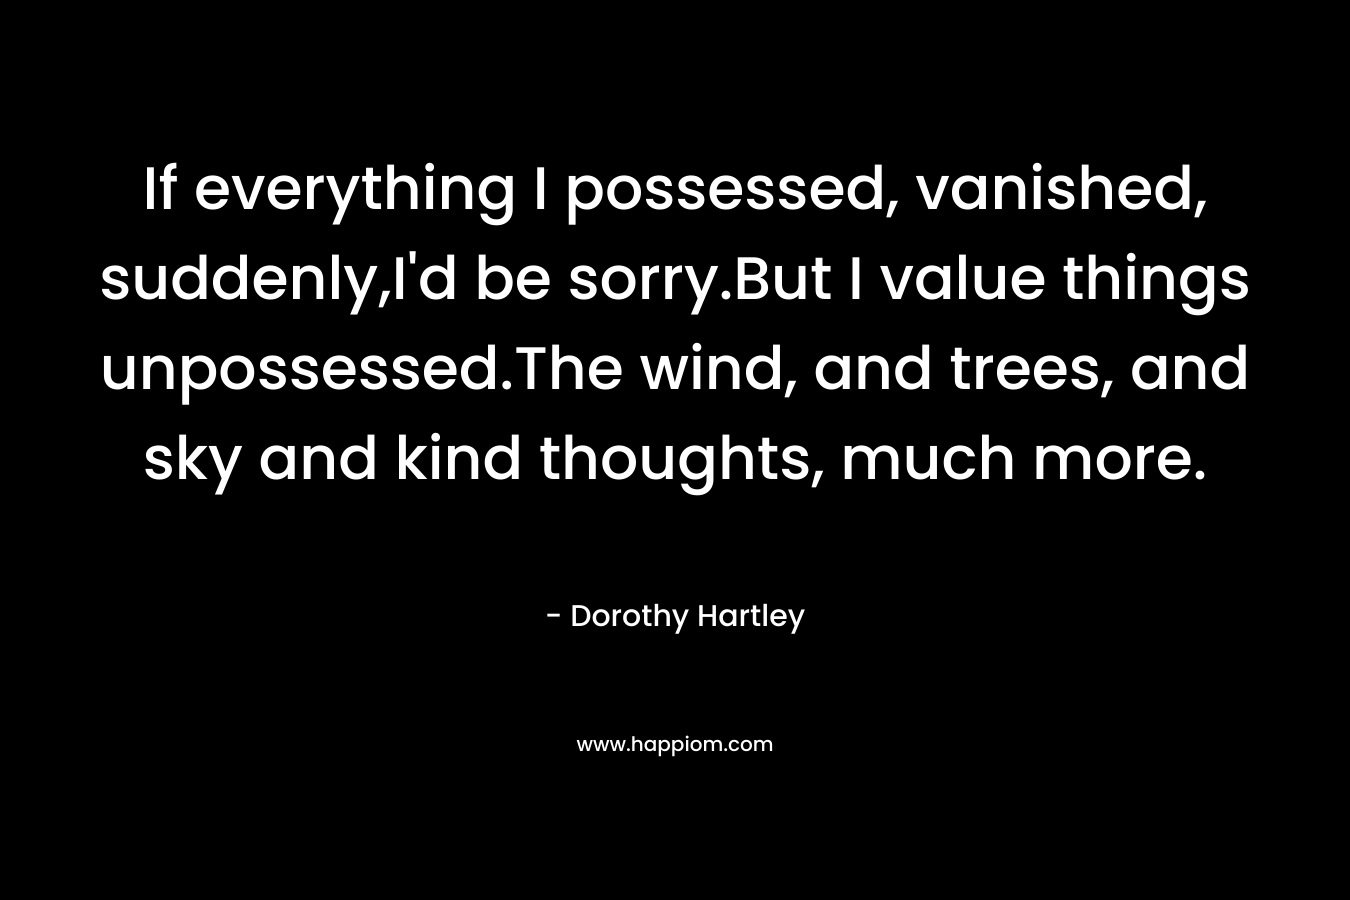 If everything I possessed, vanished, suddenly,I'd be sorry.But I value things unpossessed.The wind, and trees, and sky and kind thoughts, much more.